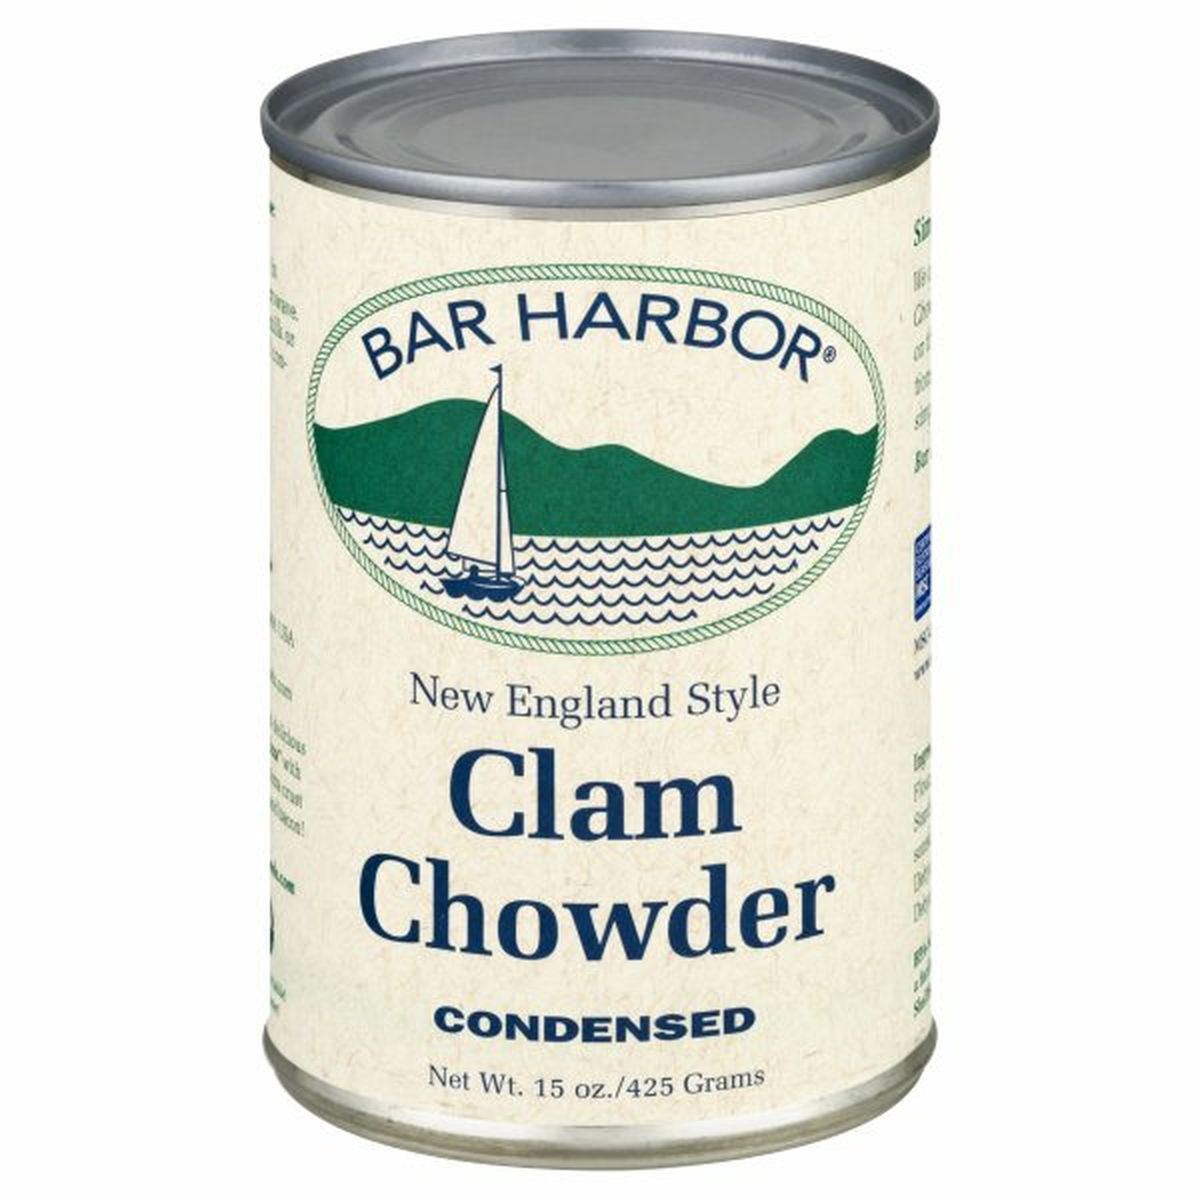 Calories in Bar Harbor Clam Chowder, New England Style, Condensed